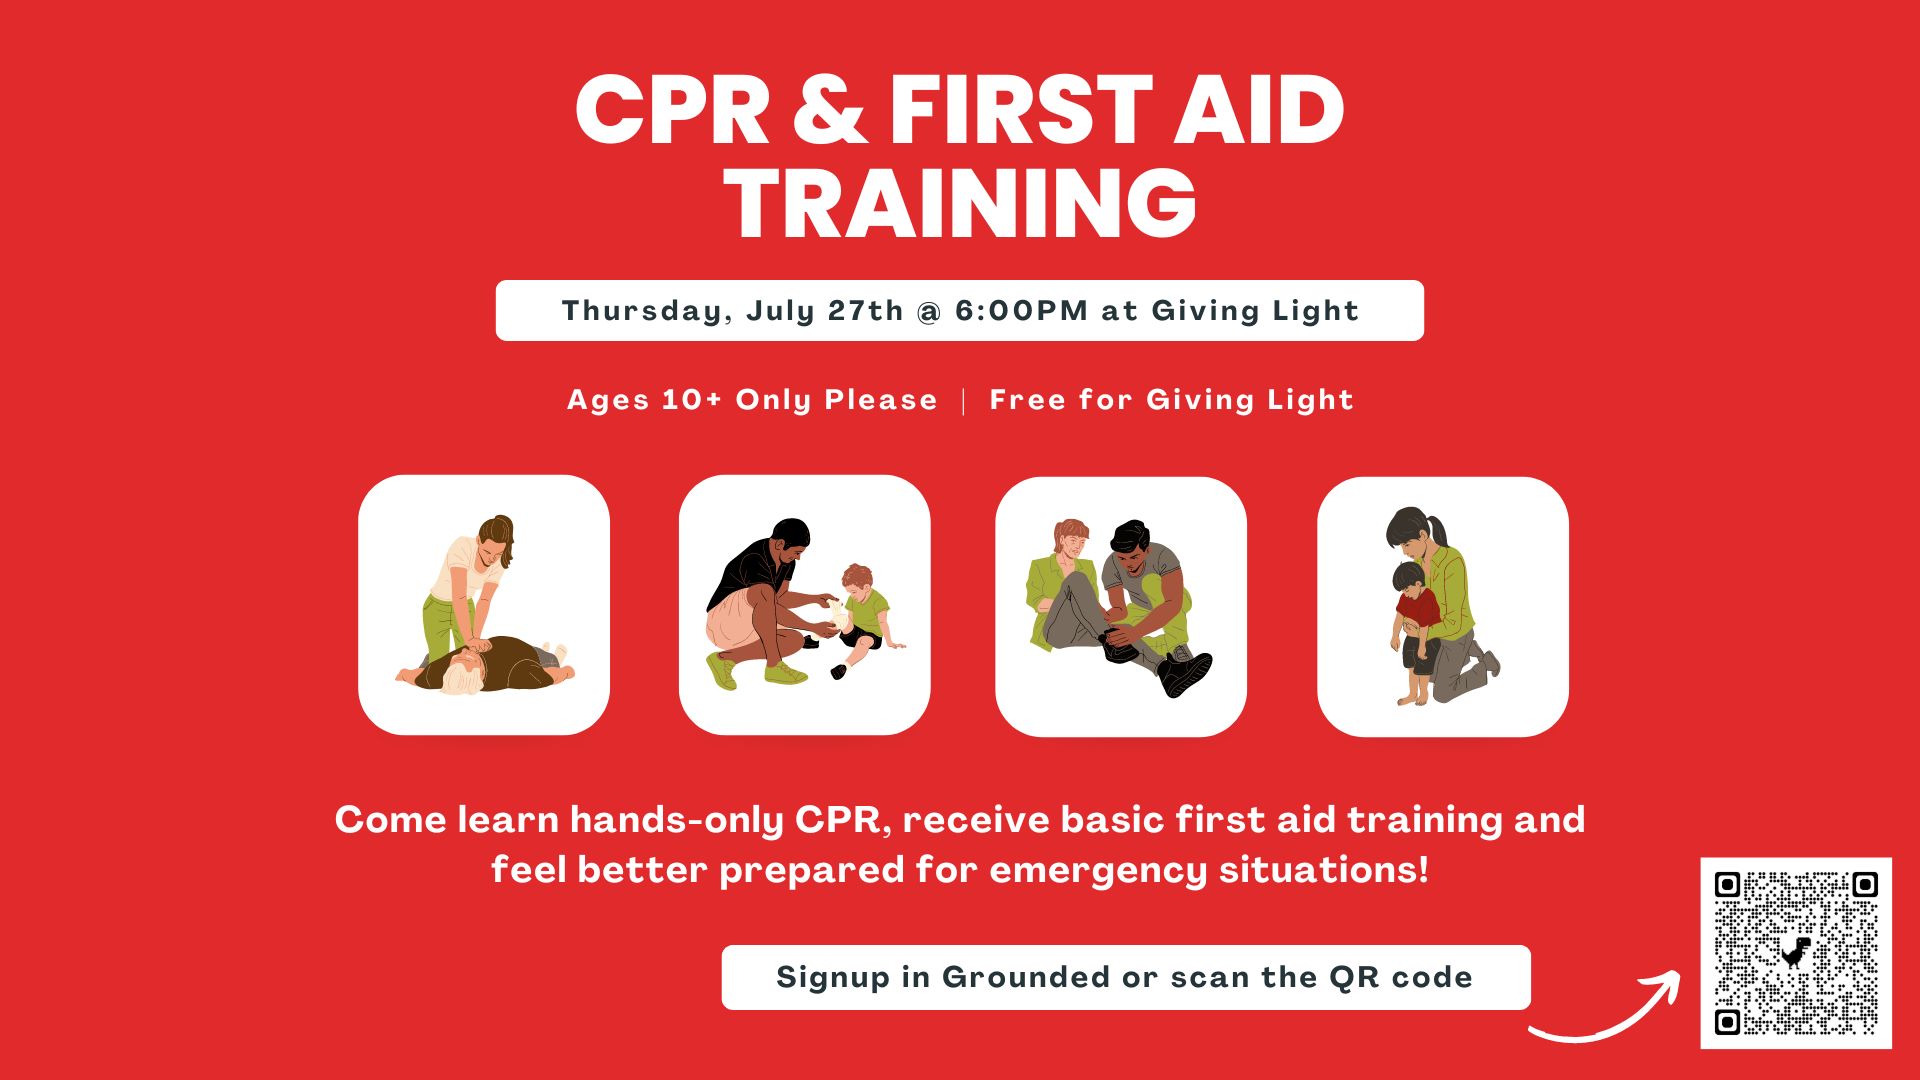 First AID & CPR Training